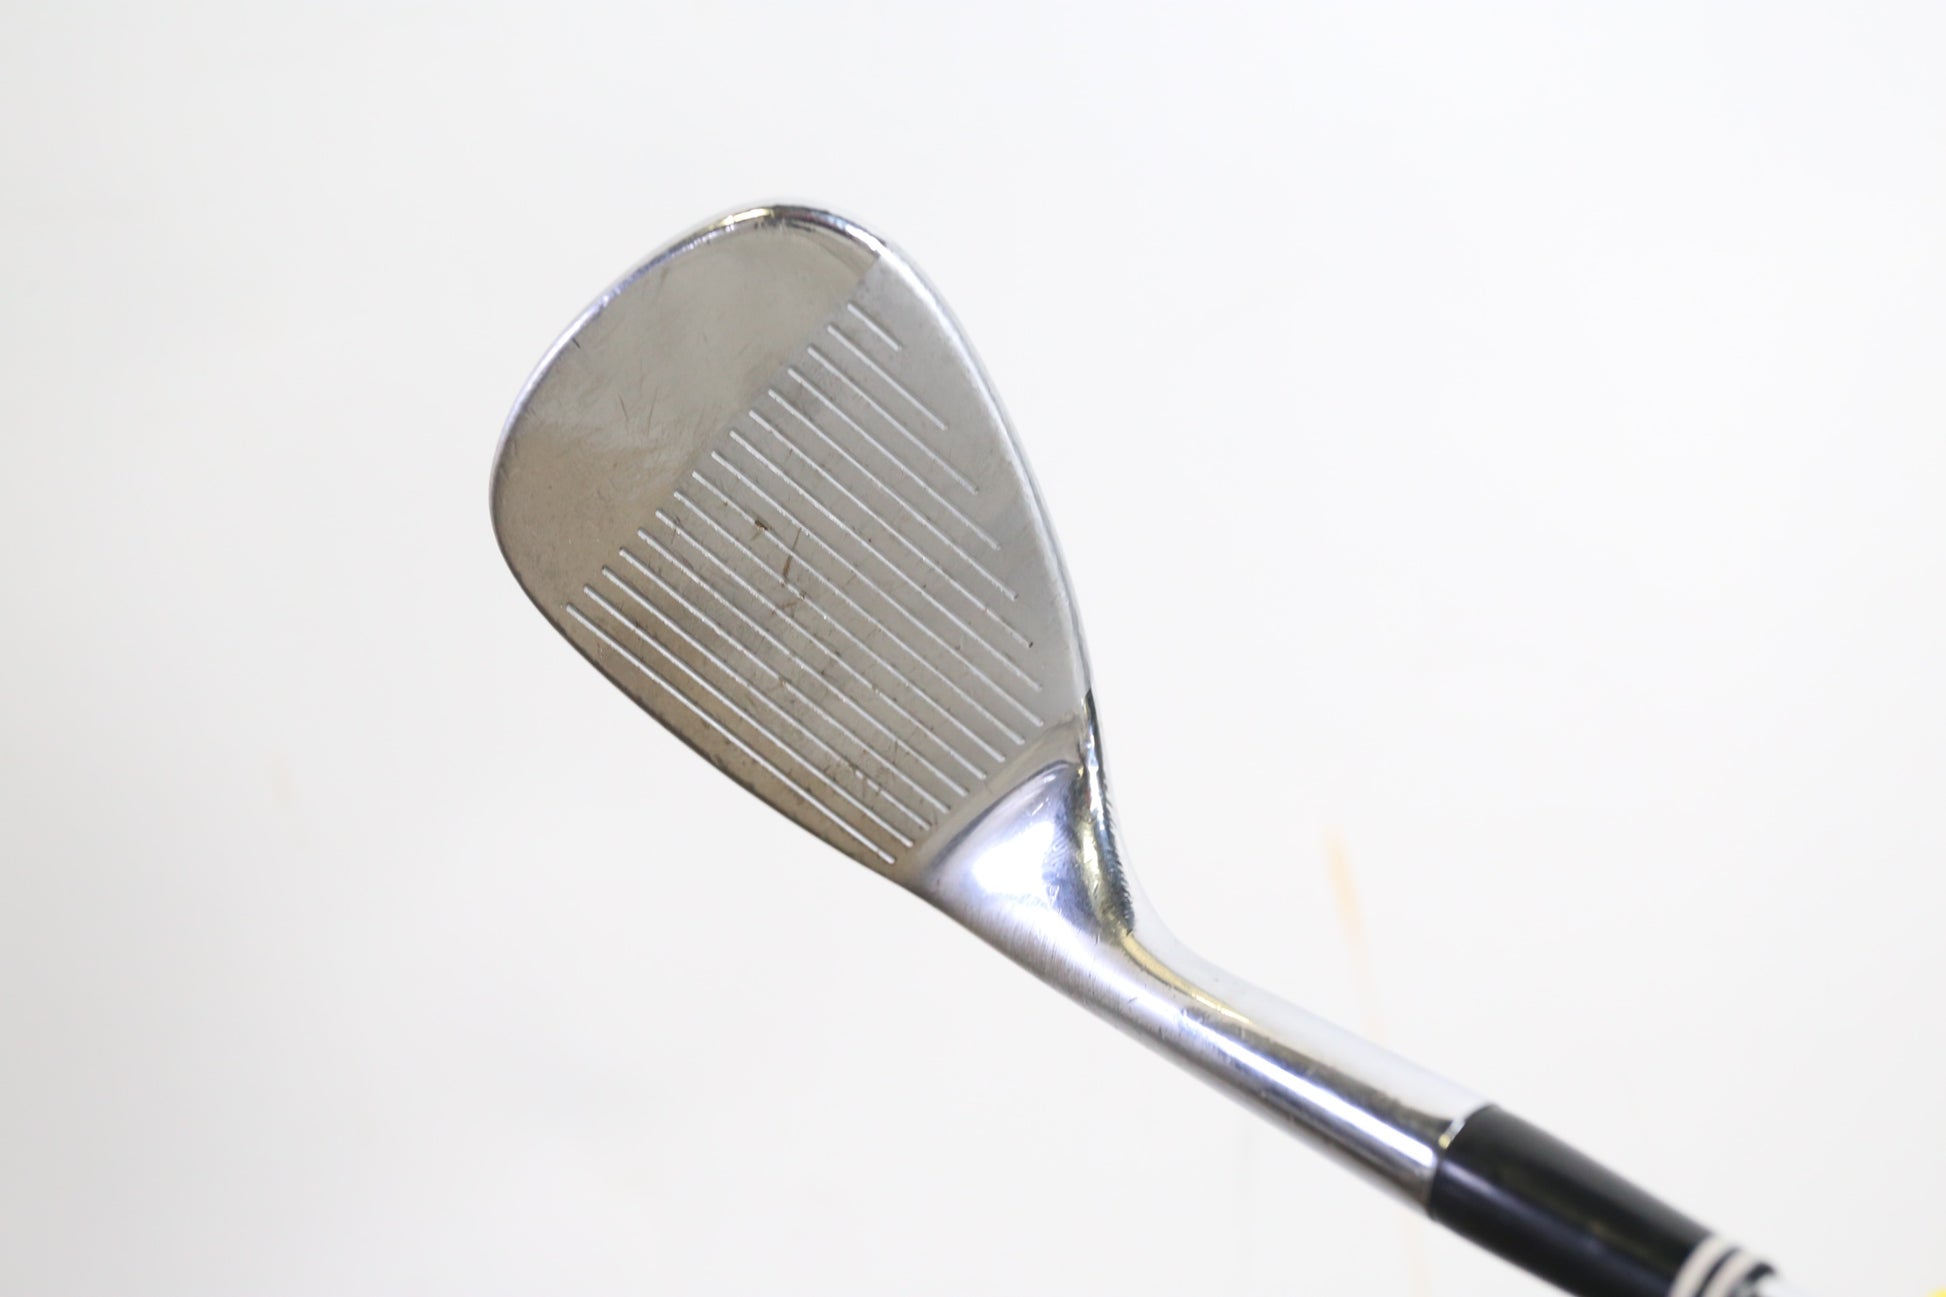 Used Cleveland 588 Tour Action Sand Wedge - Right-Handed - 56 Degrees - Stiff Flex-Next Round